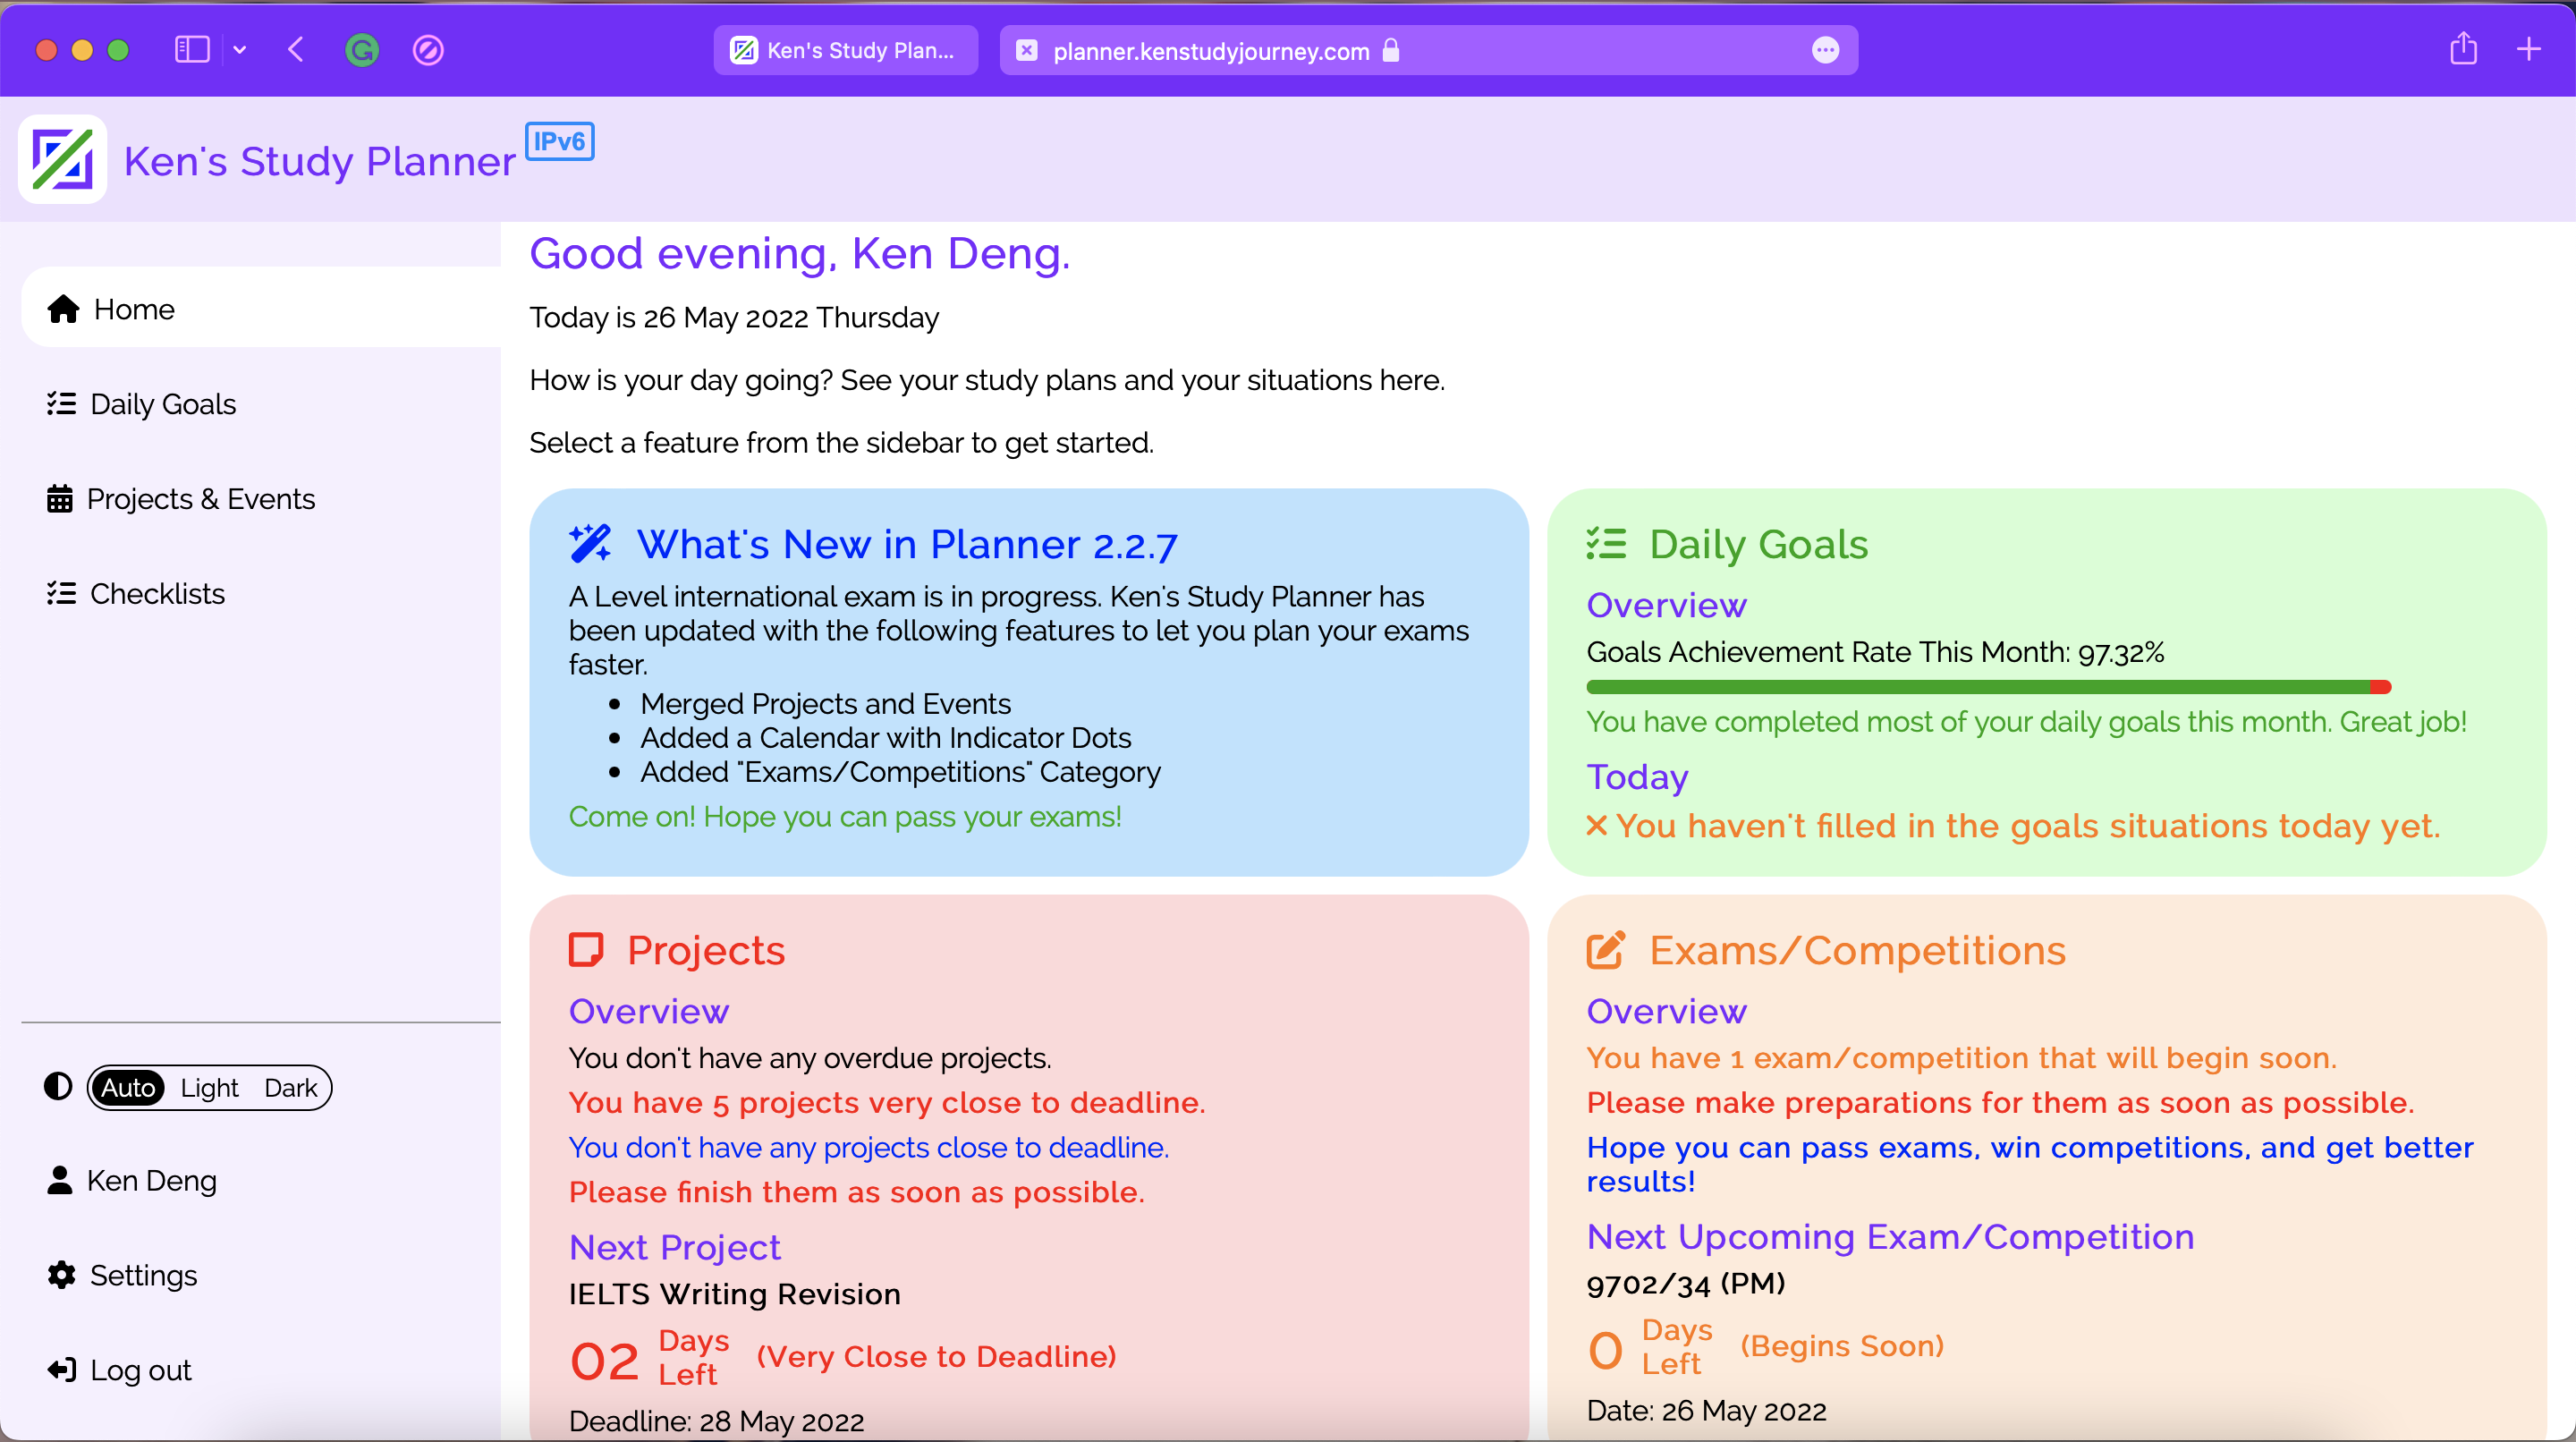 Ken's Study Planner Main Page